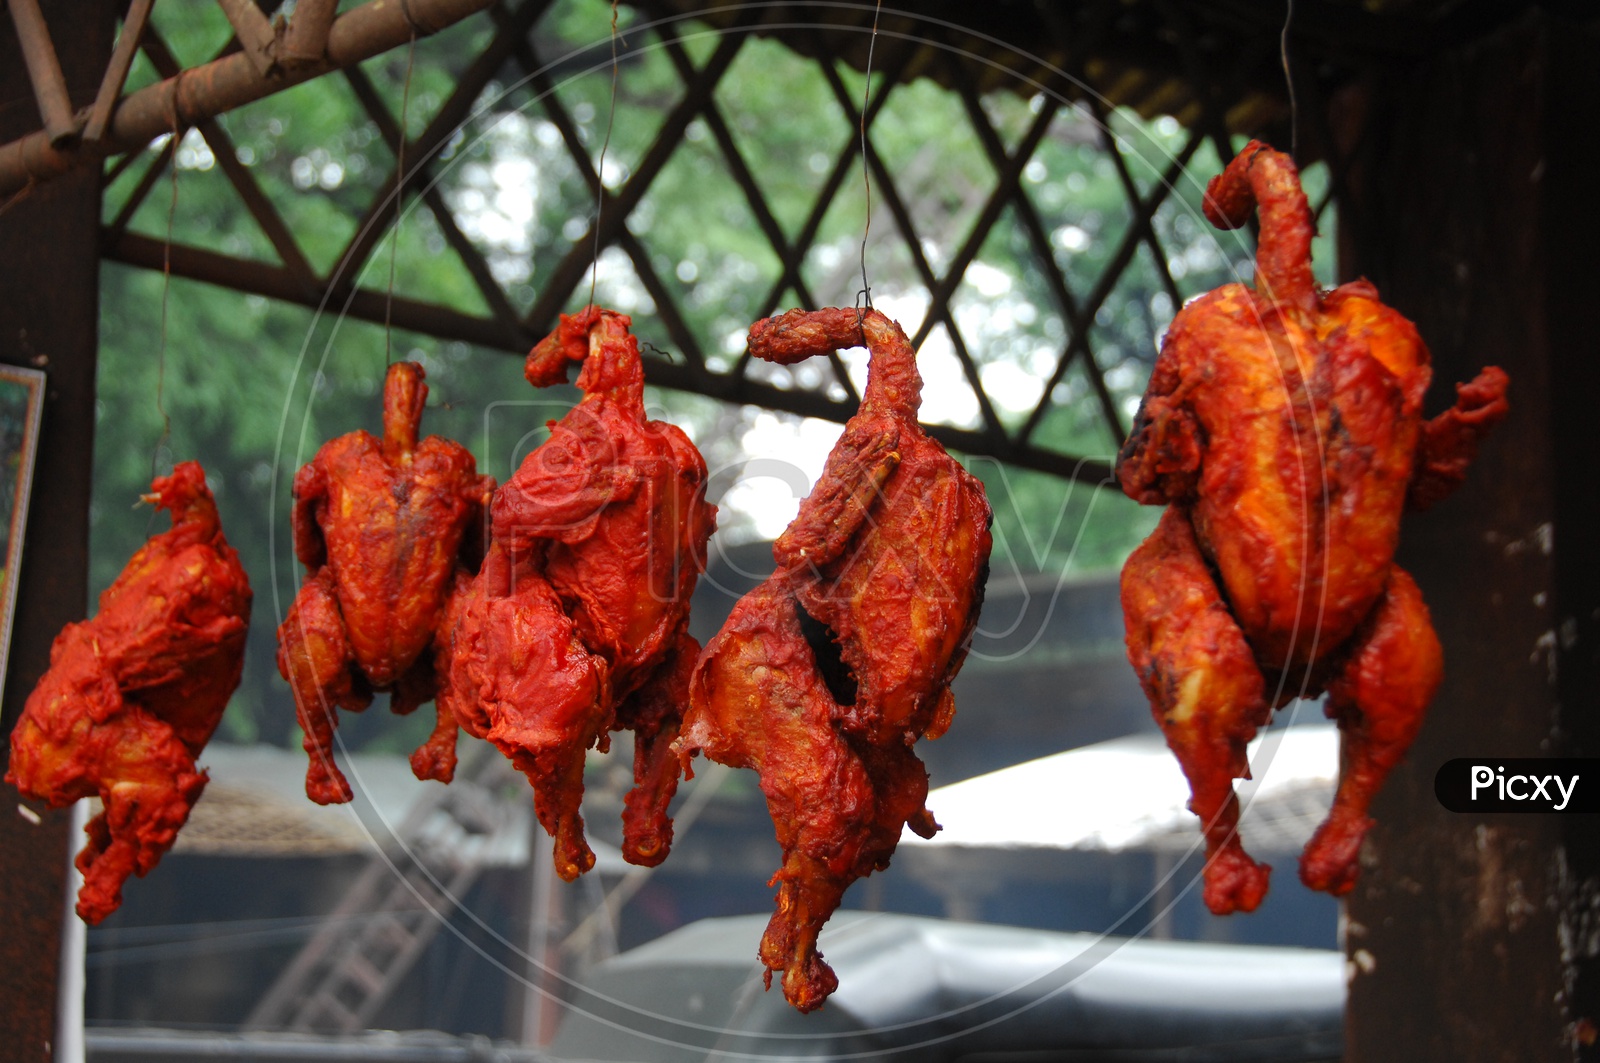 Roasted chicken in a dhaba